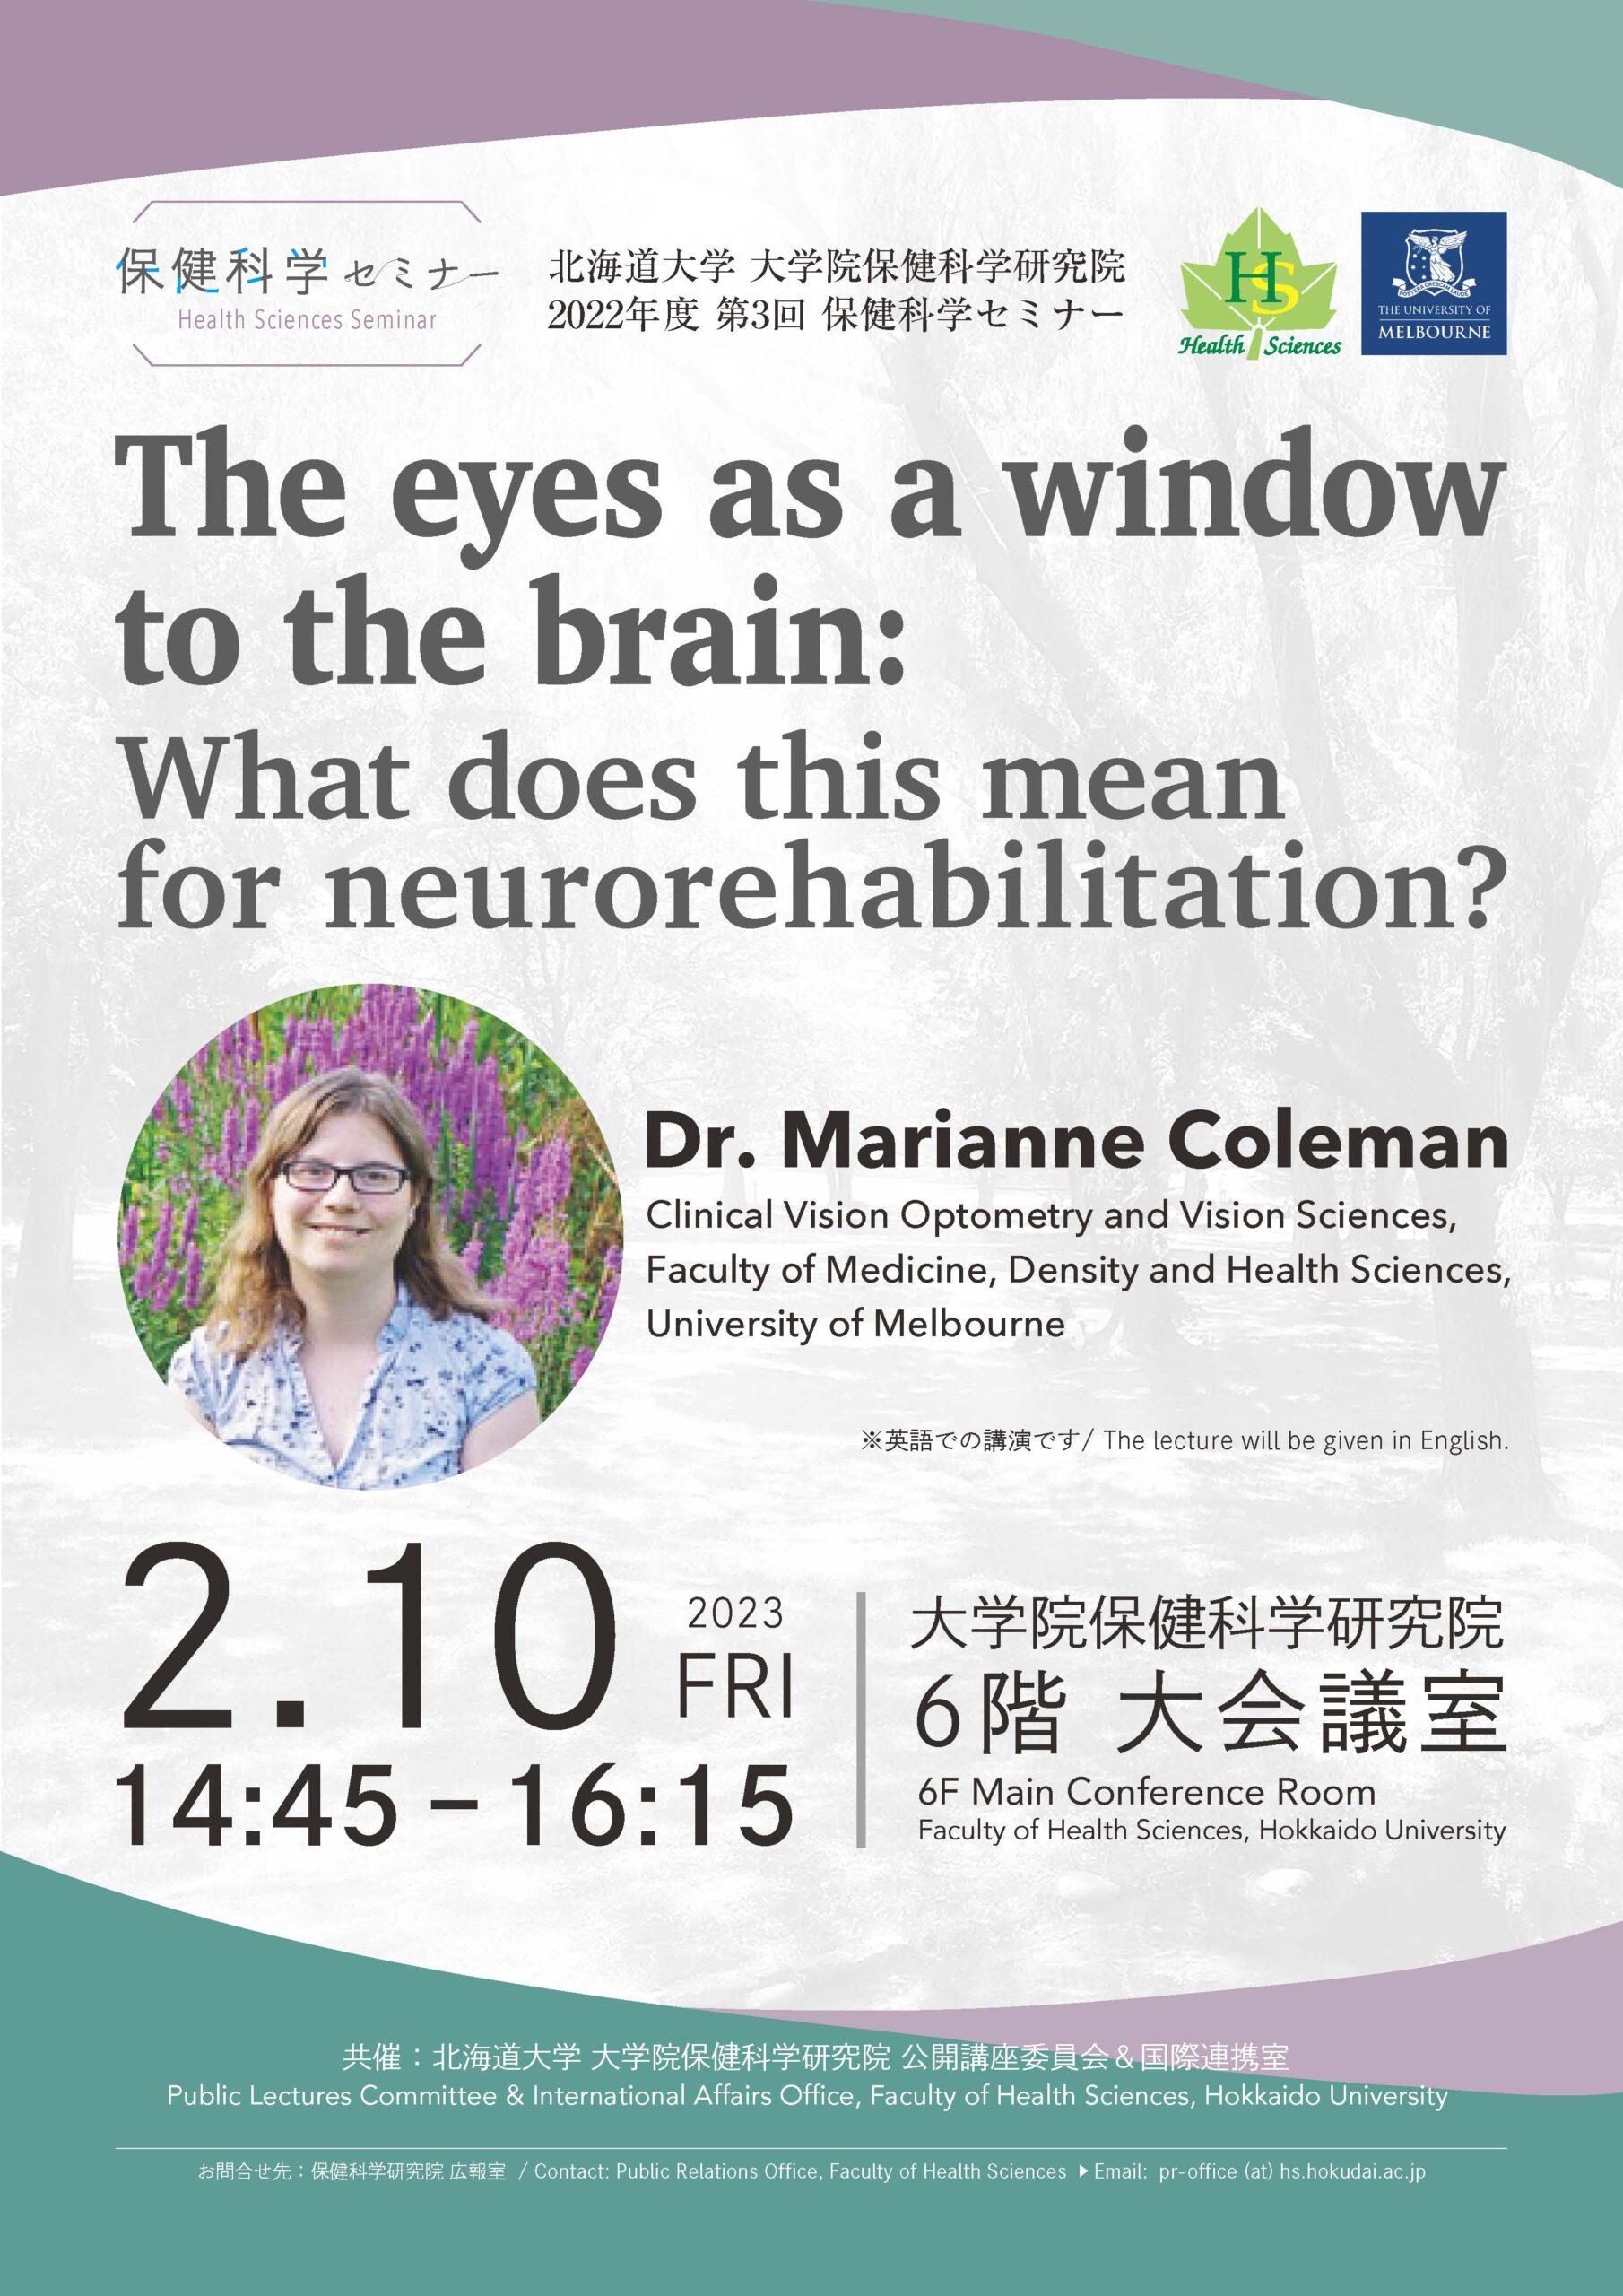 A flier of the seminar featuring a photo of the speaker, Dr. Marianne Coleman, entitled "The eyes as a window to the brain: What does this mean for neurohabilitation?"